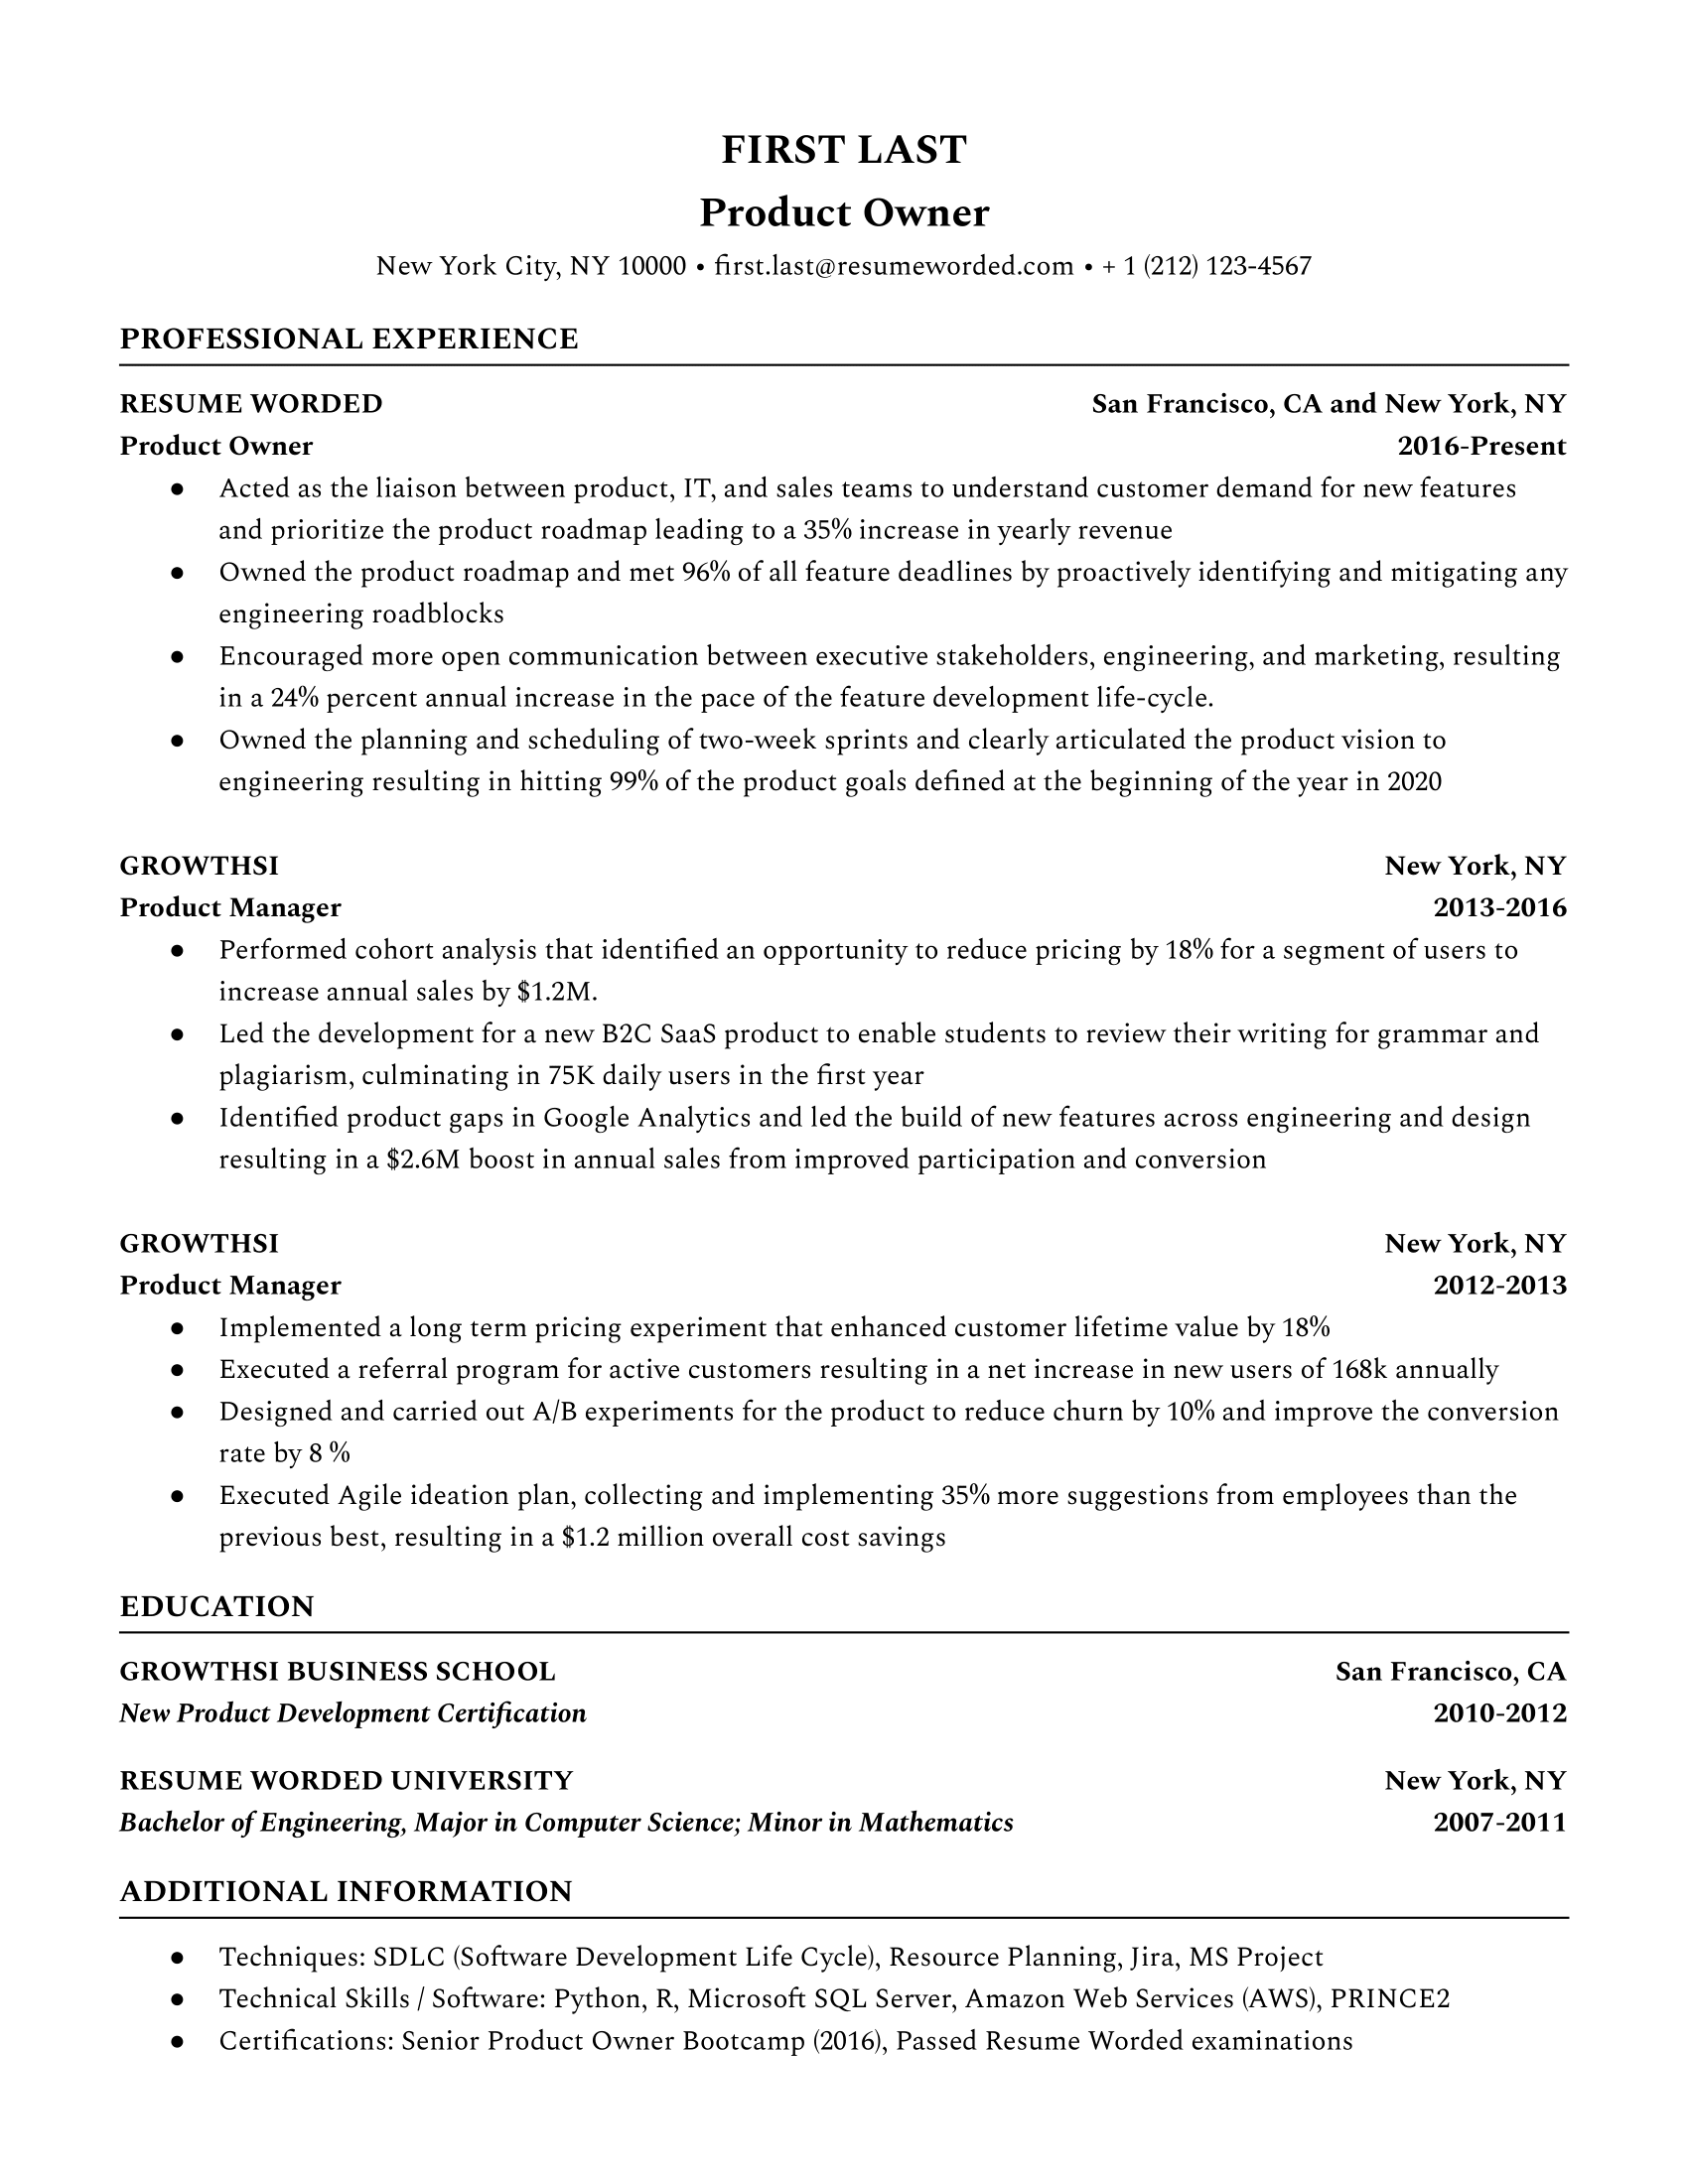 Highlight relevant experience - Office Manager Resume